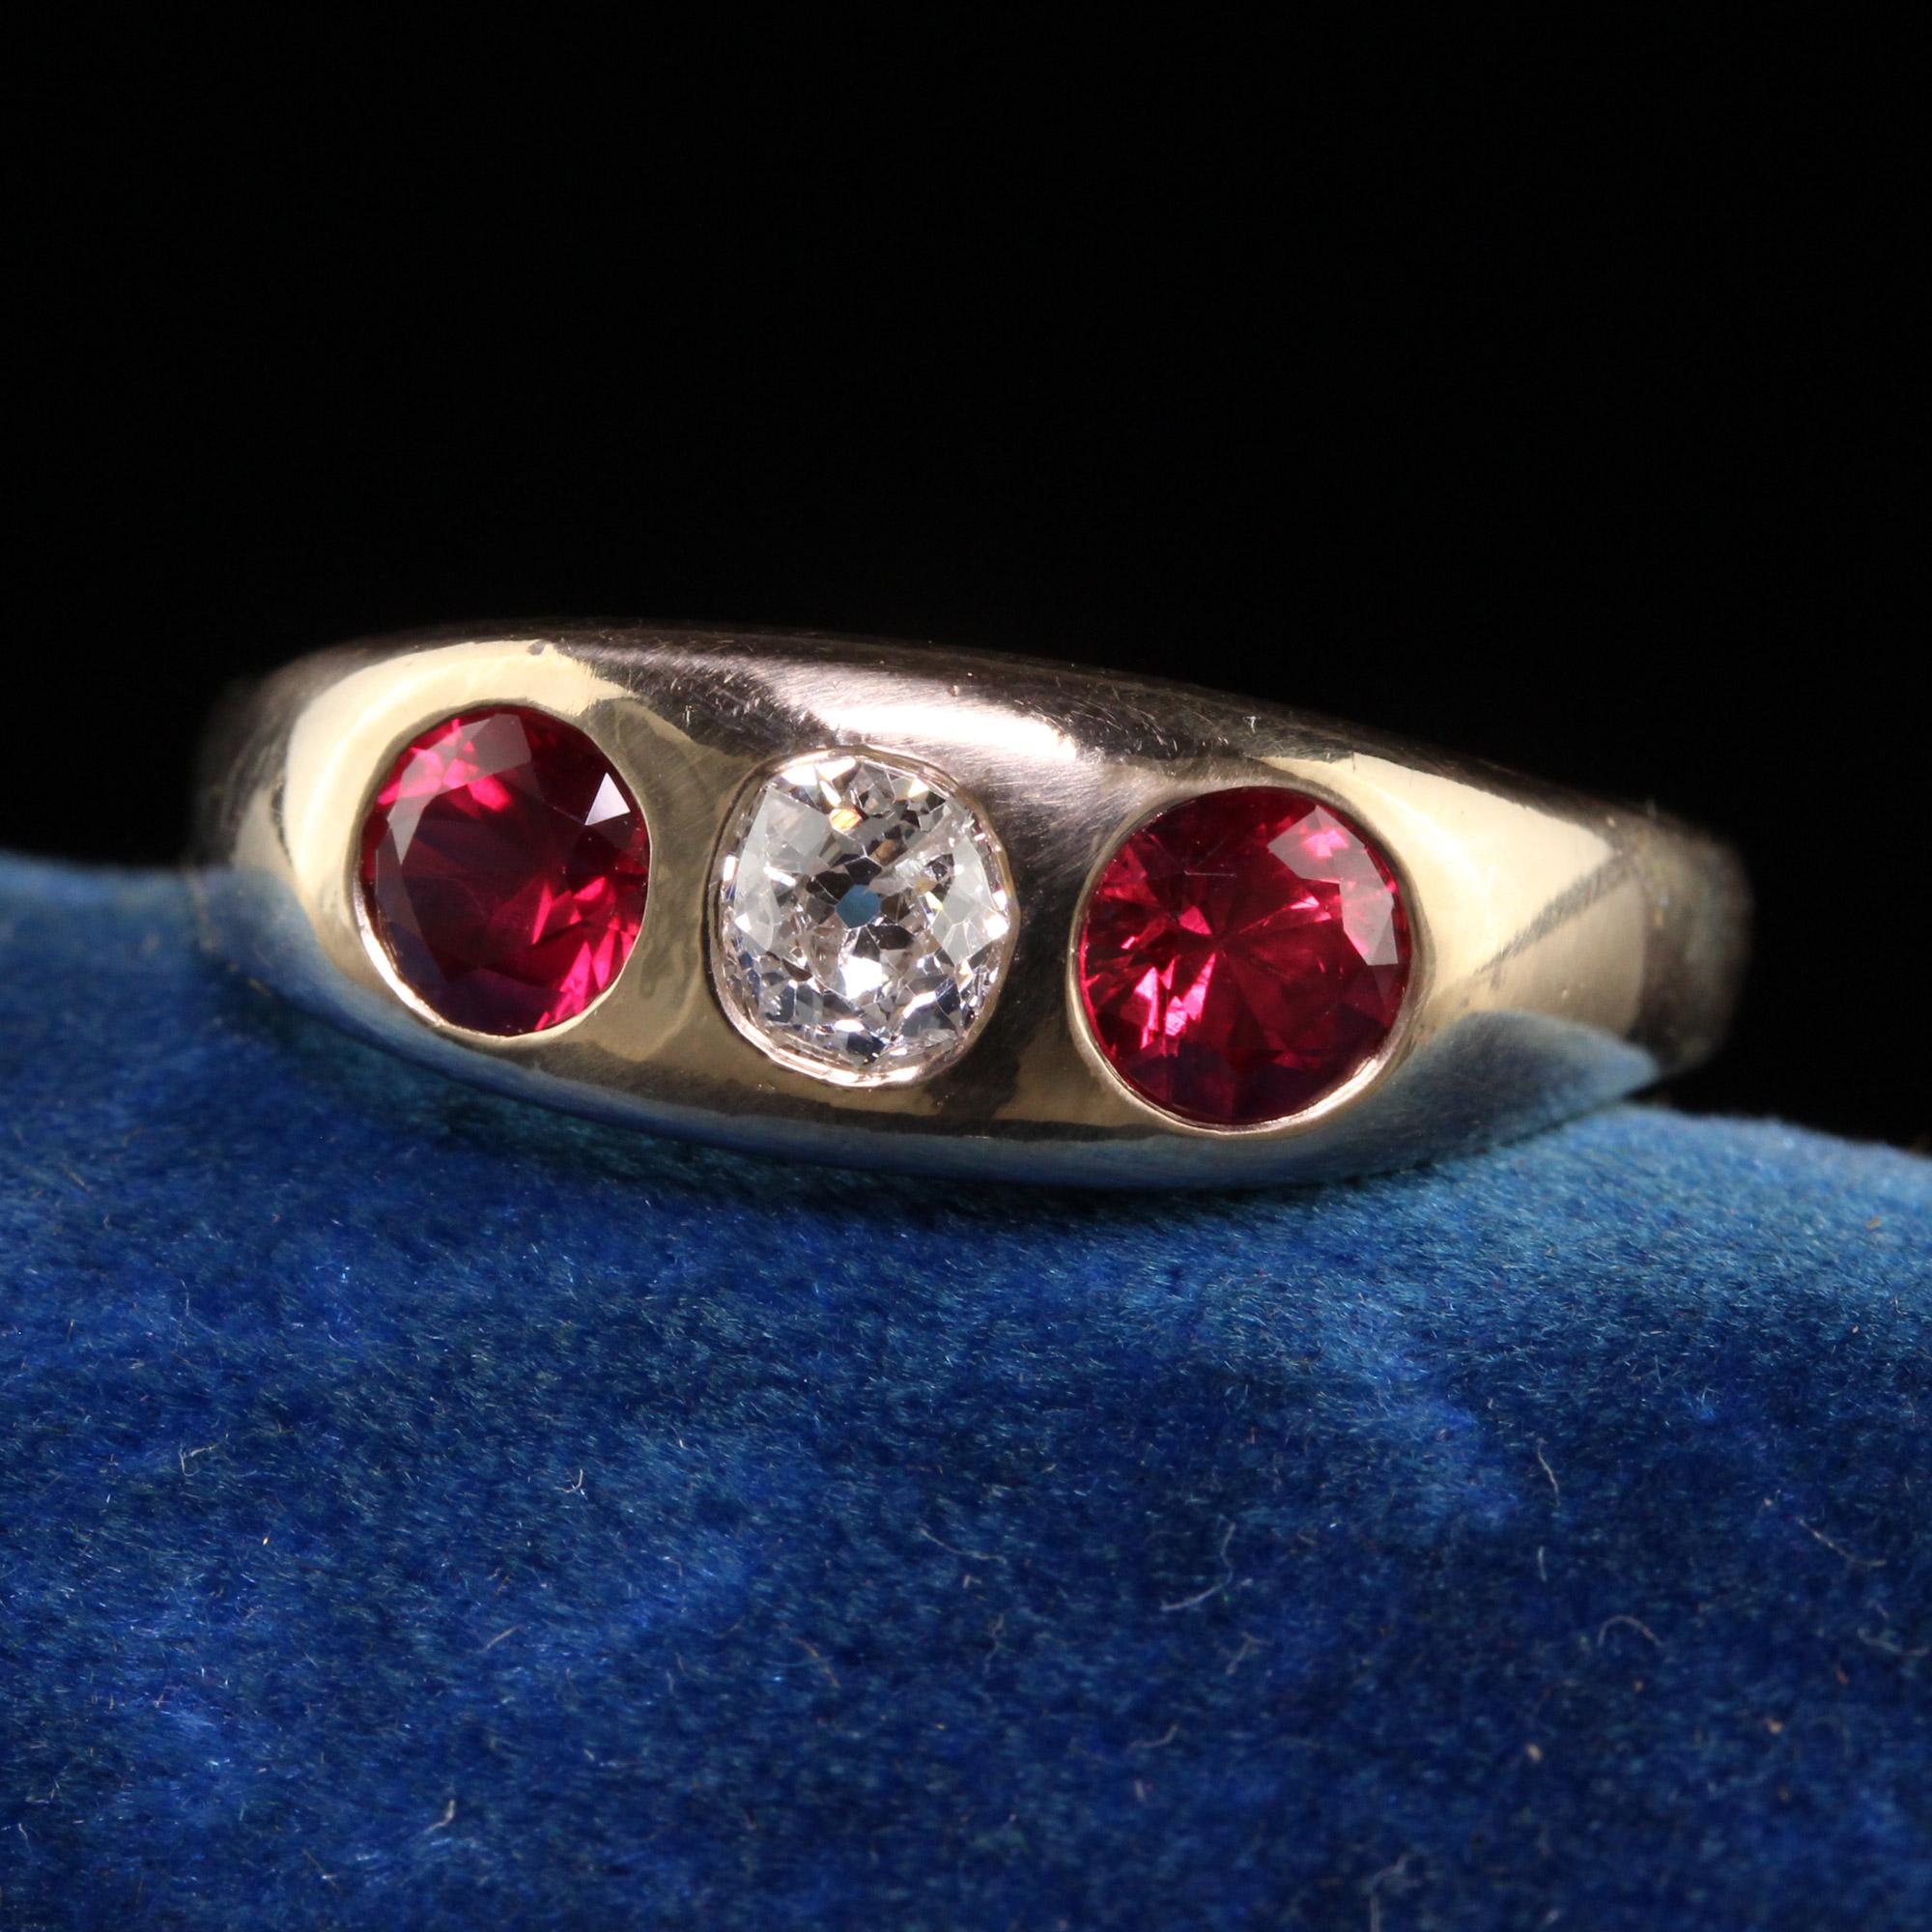 Beautiful Antique Victorian 14k Yellow Gold Natural Ruby Old Mine Diamond Flush Set Ring. This gorgeous ring is crafted in 14k yellow gold. The center holds an old mine cut diamond and has two natural vivid red rubies on each side. The ring has a